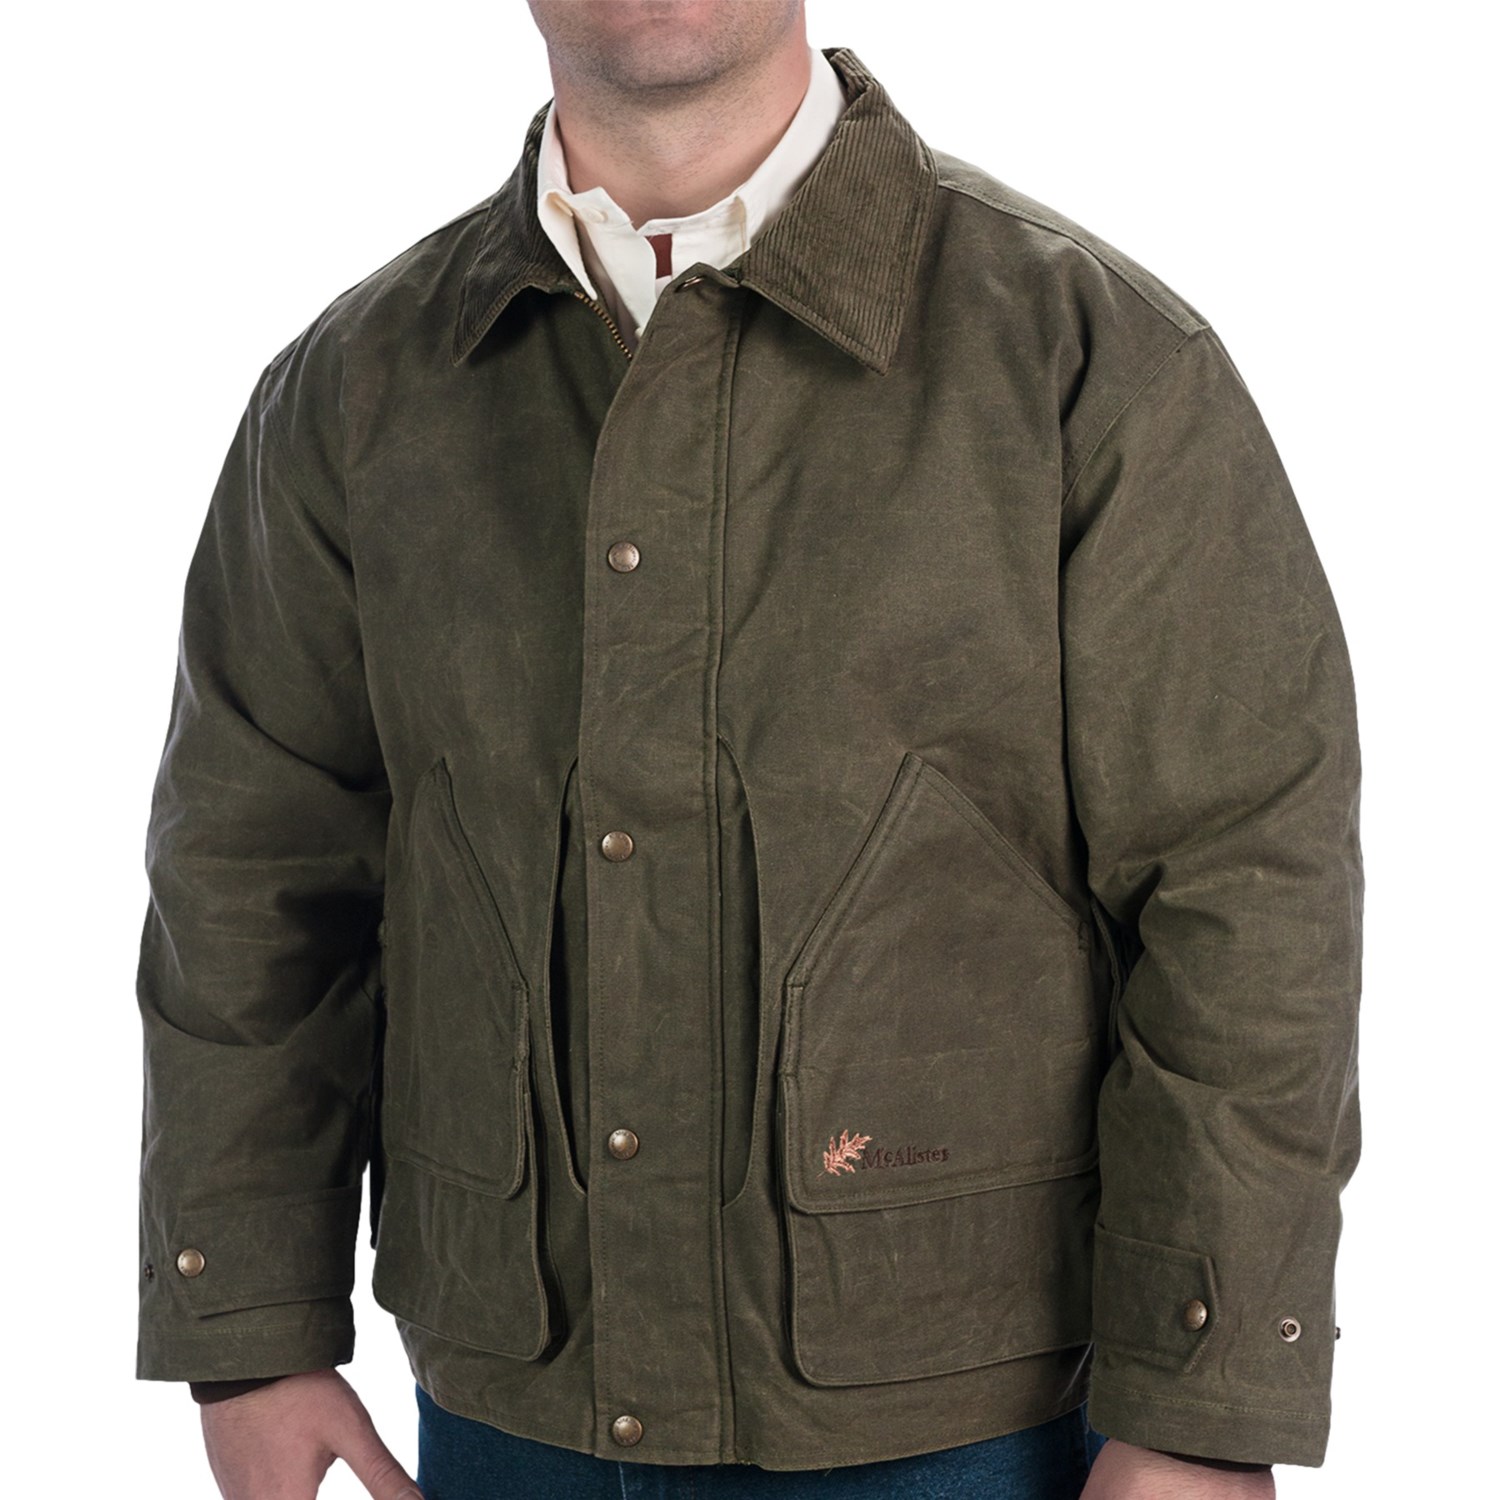 Mcalister Waterfowl Jacket | vlr.eng.br